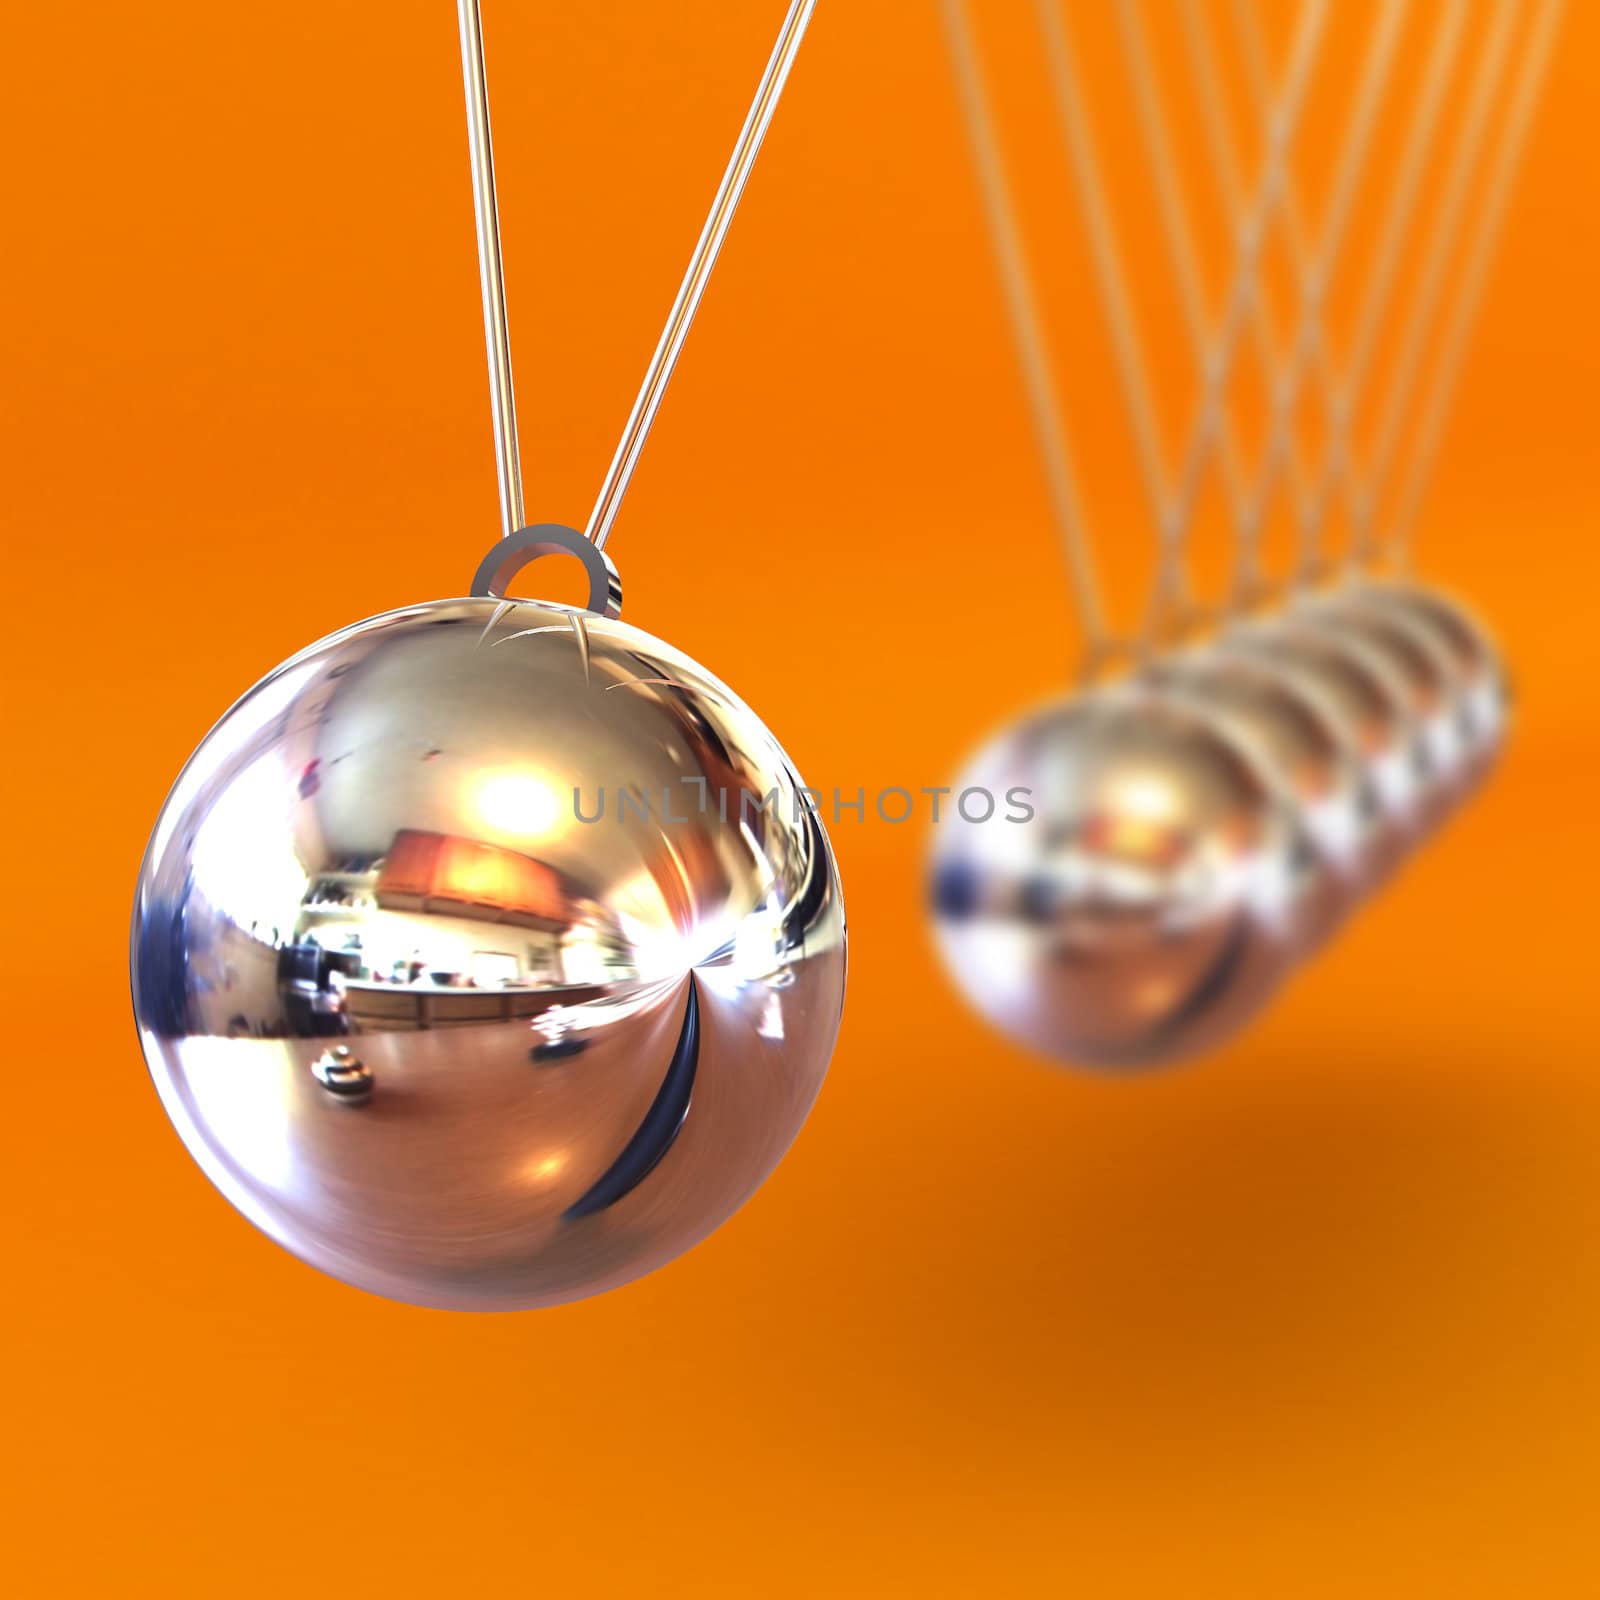 A Colourful 3d Rendered Newtons Cradle Illustration against an Orange Background